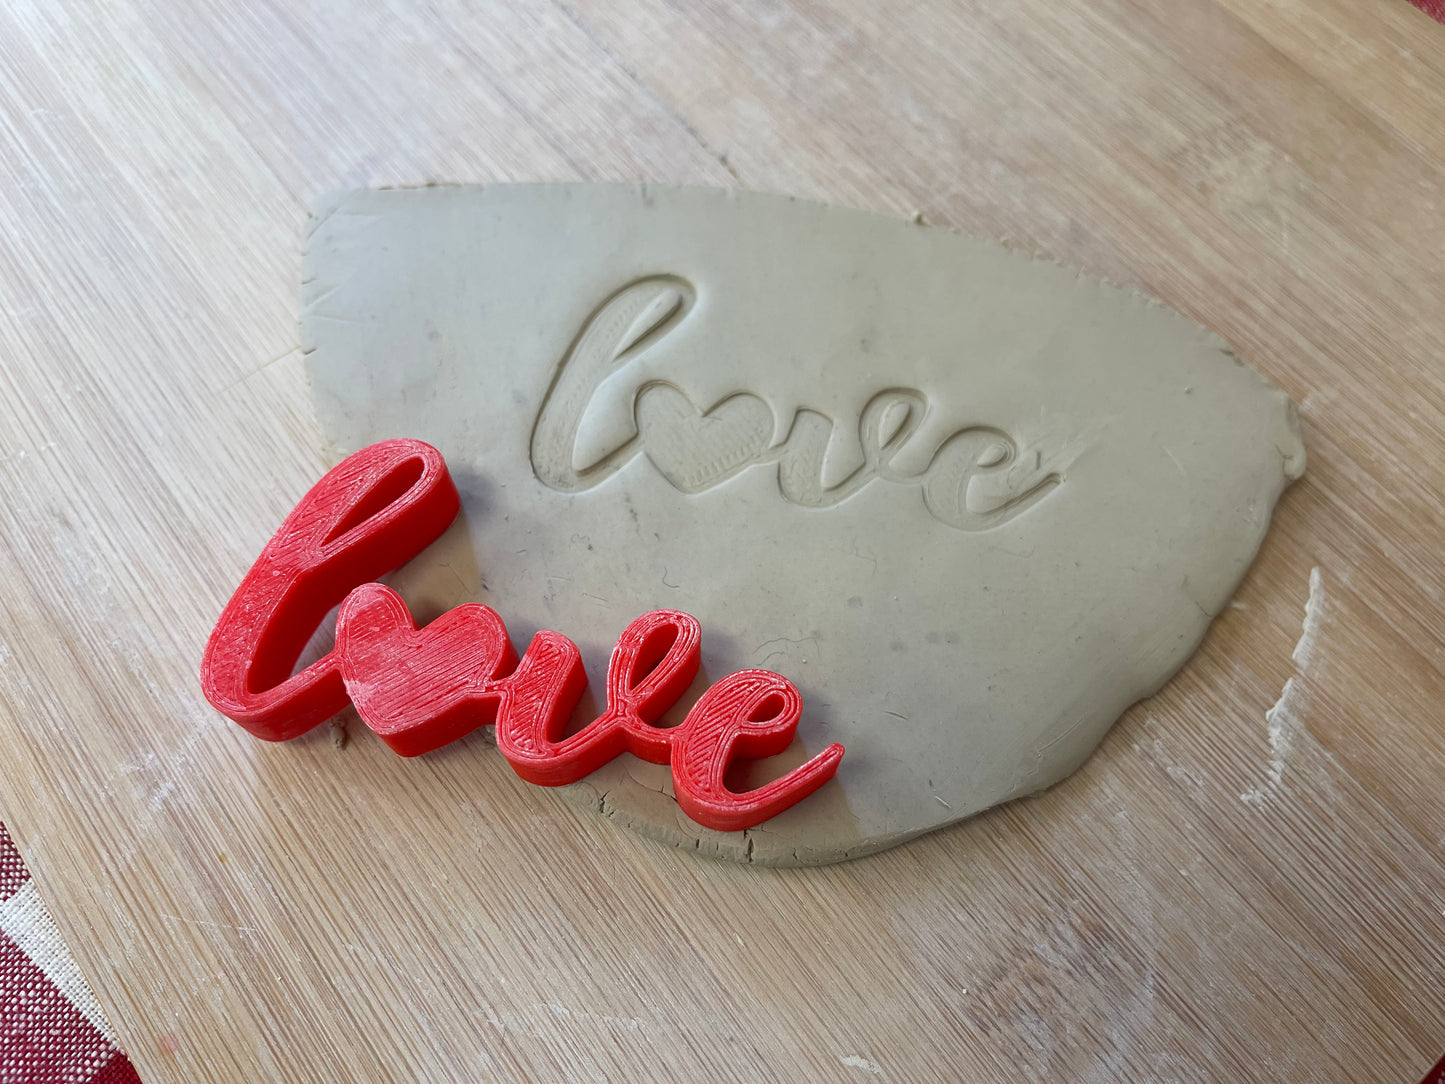 Pottery Stamp, LOVE with heart word design - multiple sizes